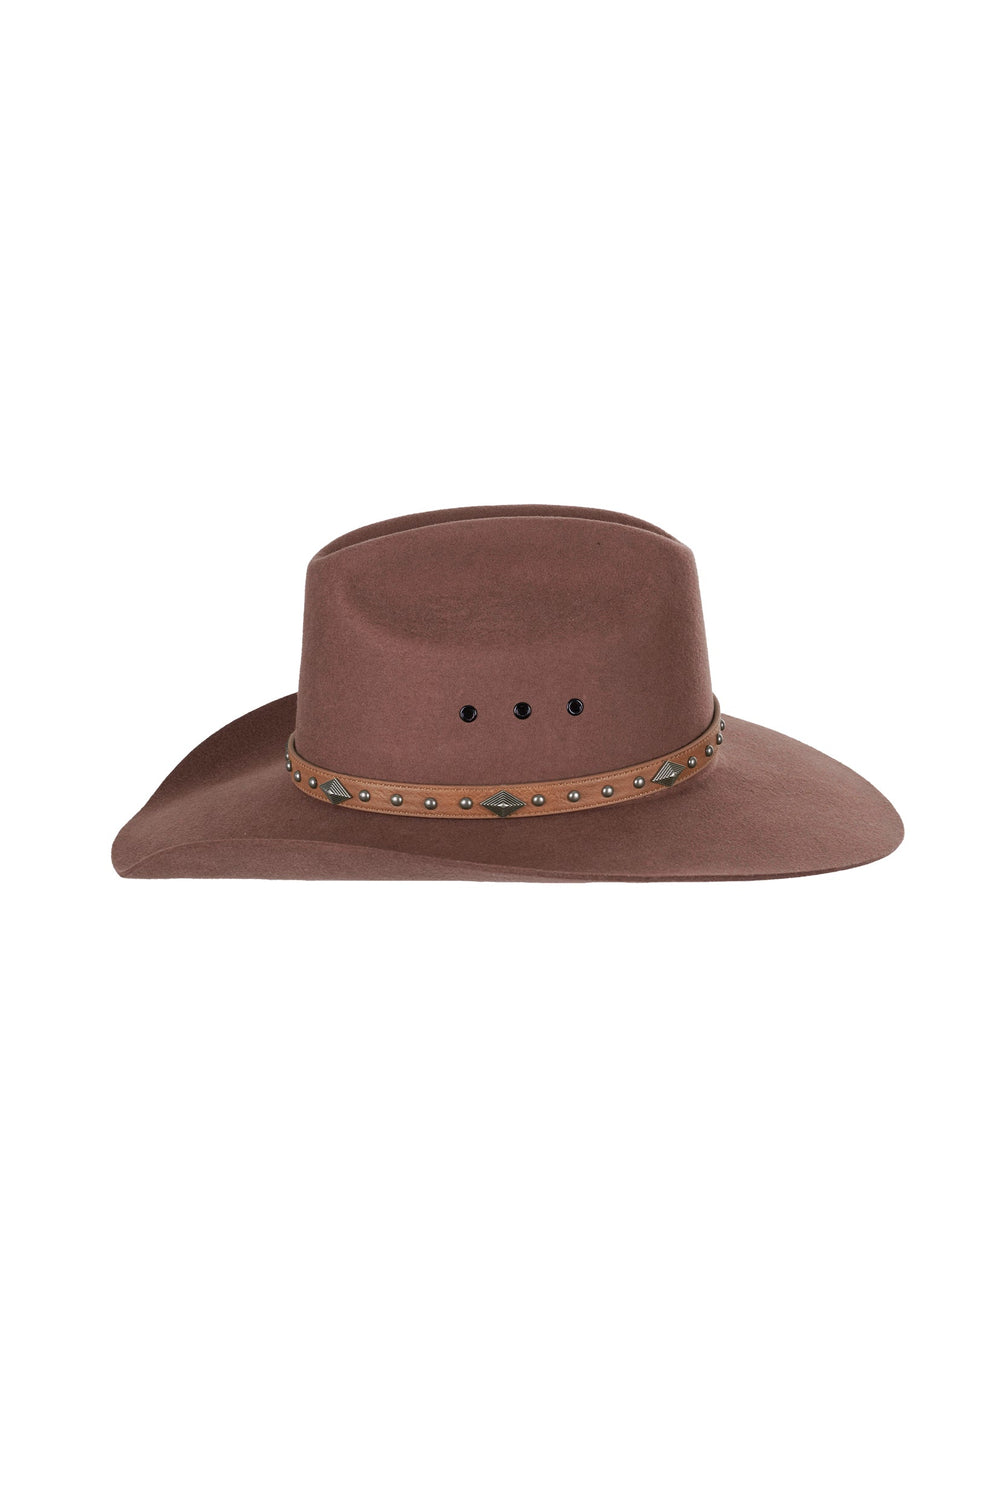 Pure Western Hat Accessories Pure Western Hat Band Toby